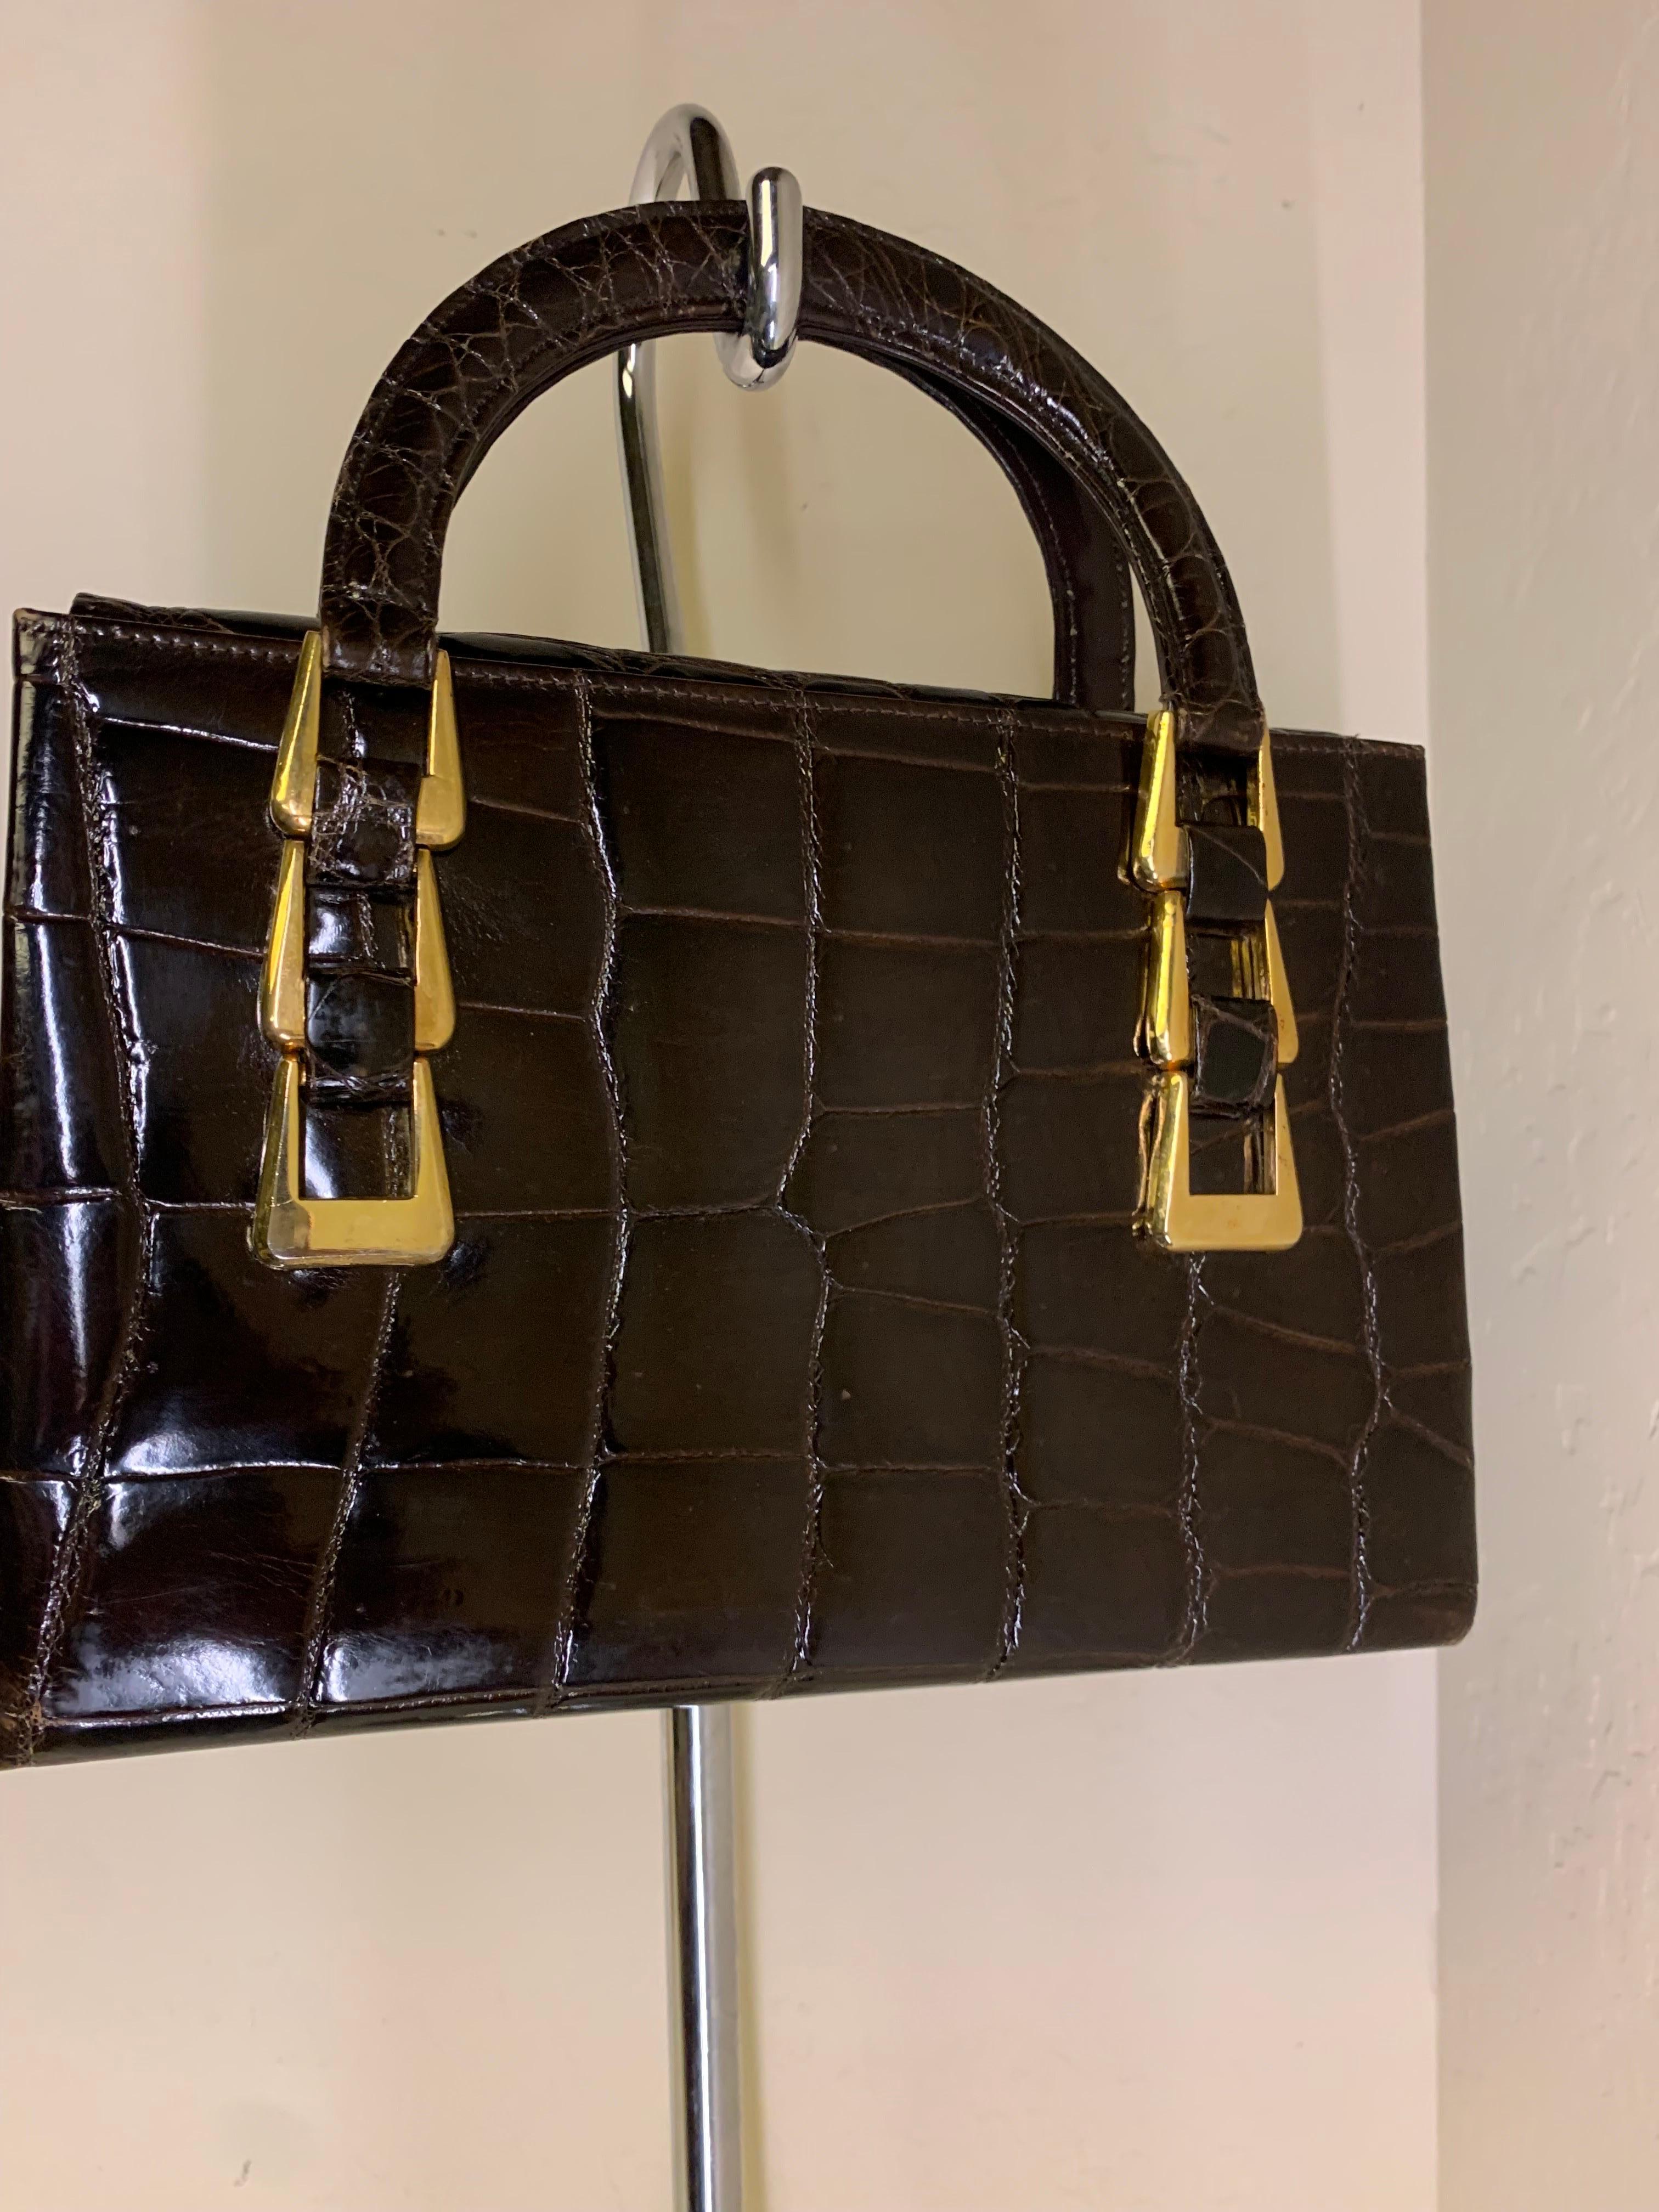 1960s Saks Fifth Avenue deep brown alligator tote bag with triple buckle detail. Made in France. Brown leather lining in pristine condition. Fold-over top piece with tab for easy opening is hidden inside. Small to medium capacity. 